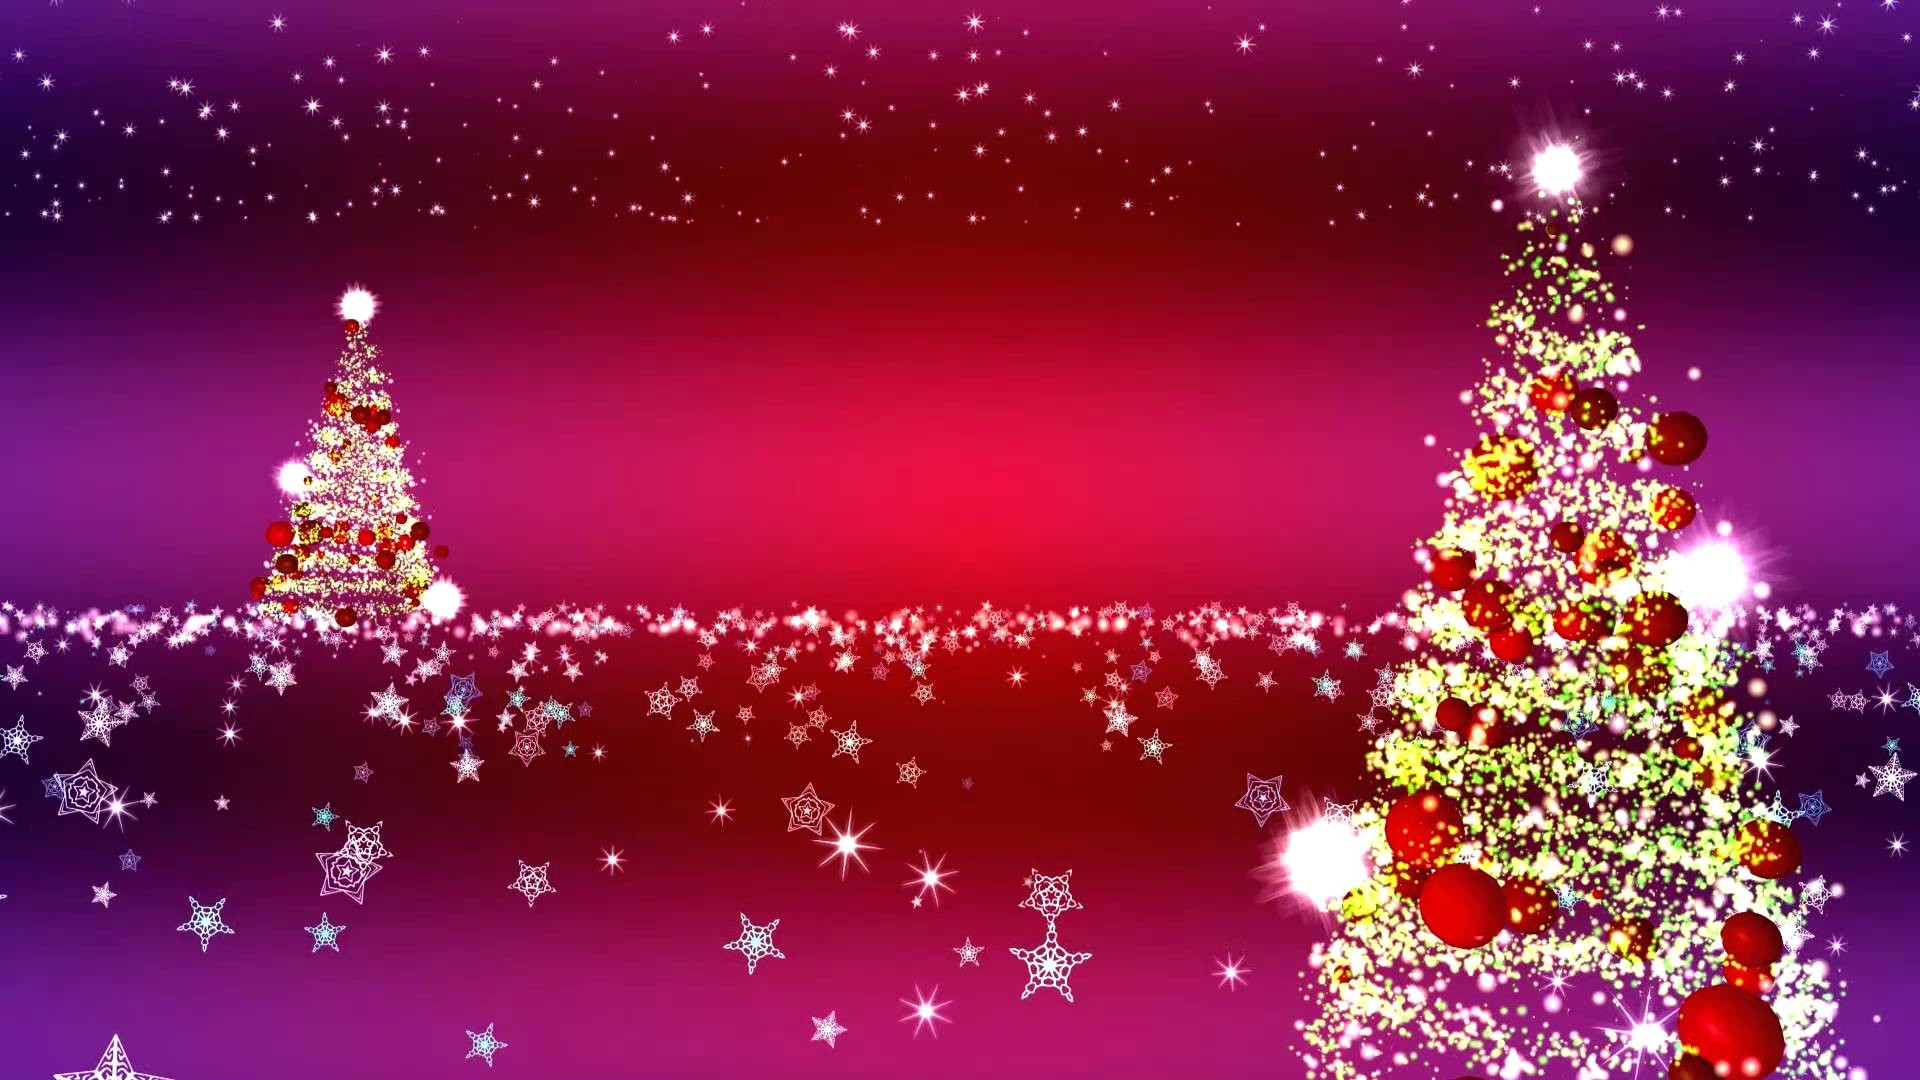 1920x1080 2015 Christmas background hd wallpapers, images, photos, pictures